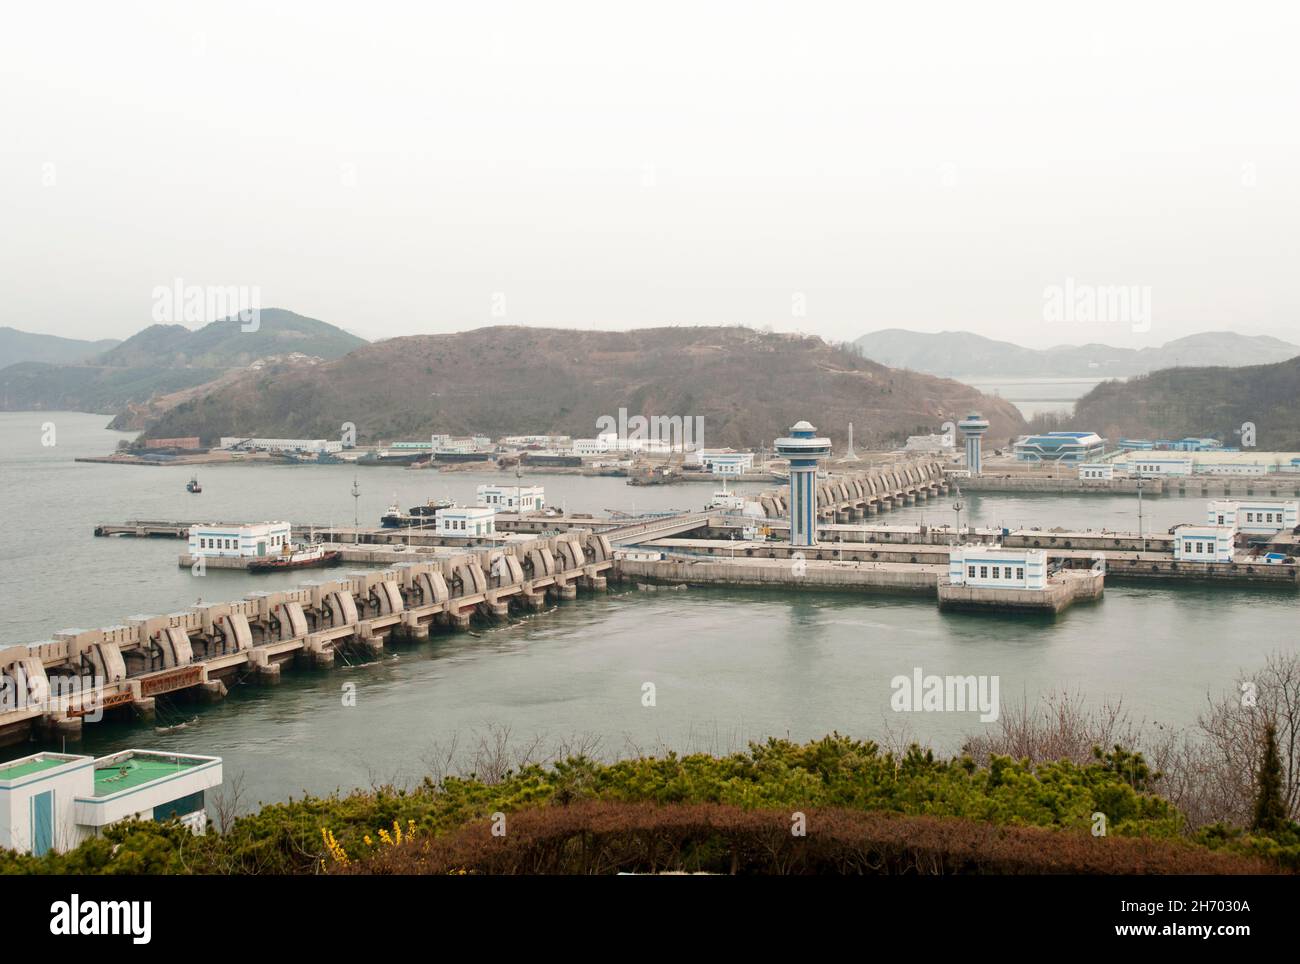 A view of the Nampo Dam, also known as the West Sea Barrage, near the city of Nampo in North Korea. Stock Photo